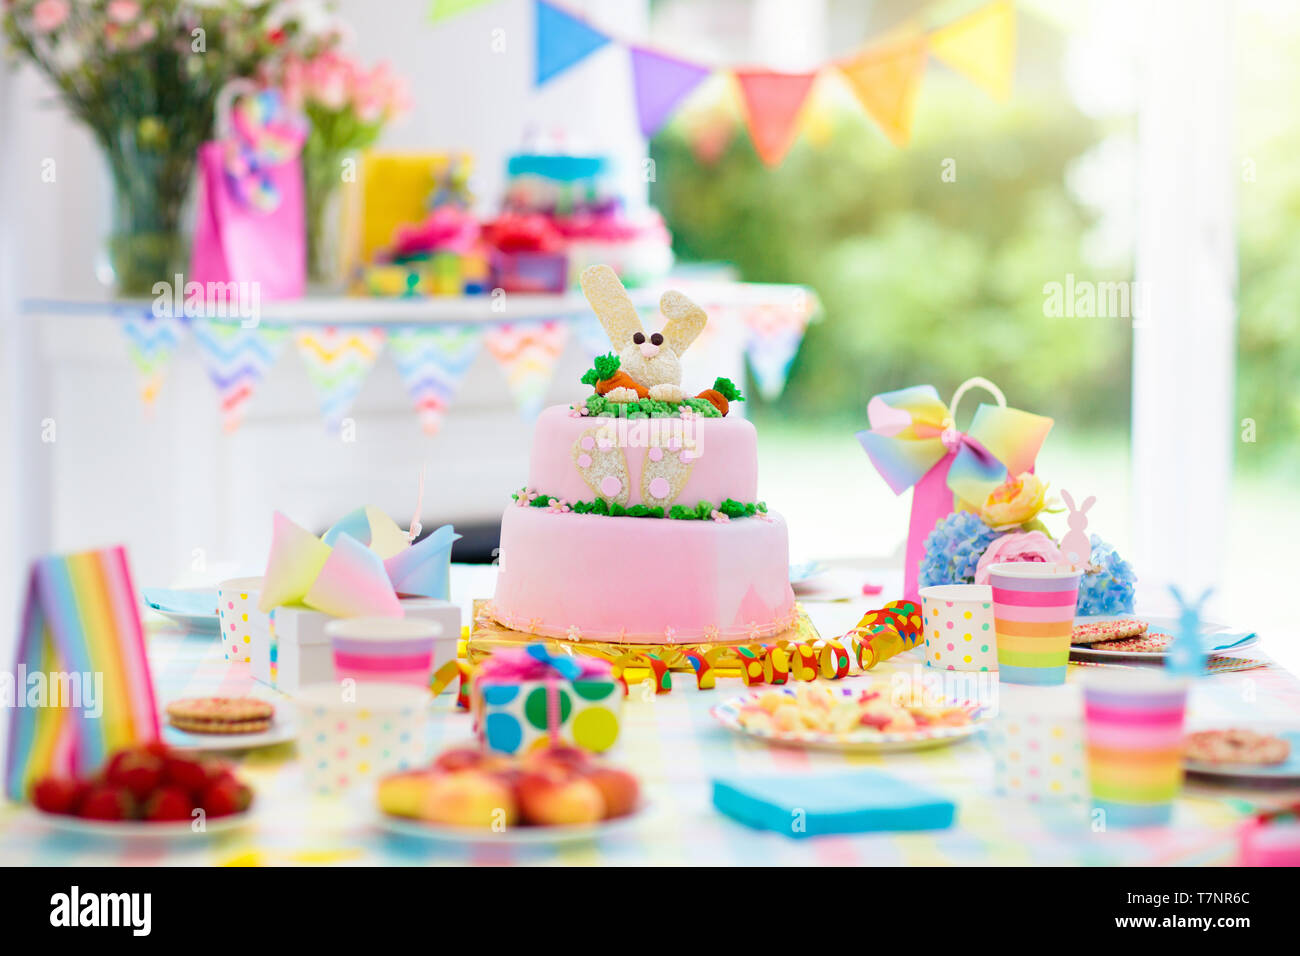 Kids birthday party decoration and cake. Decorated table for child birthday celebration. Rainbow bunny cake for little girl. Room with festive balloon Stock Photo